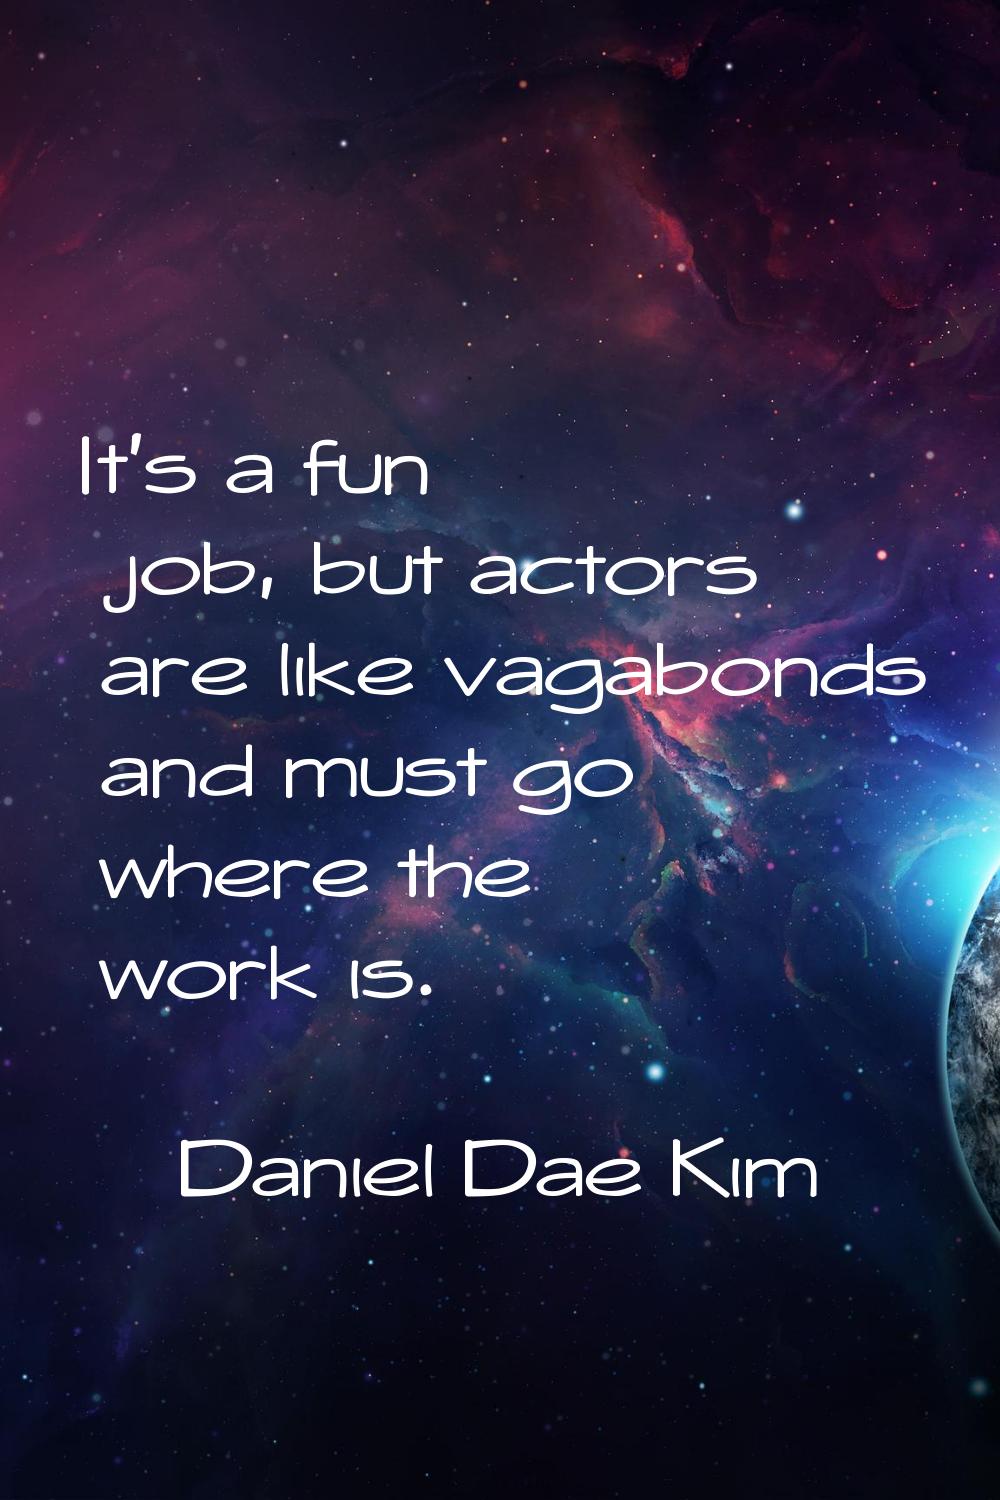 It's a fun job, but actors are like vagabonds and must go where the work is.